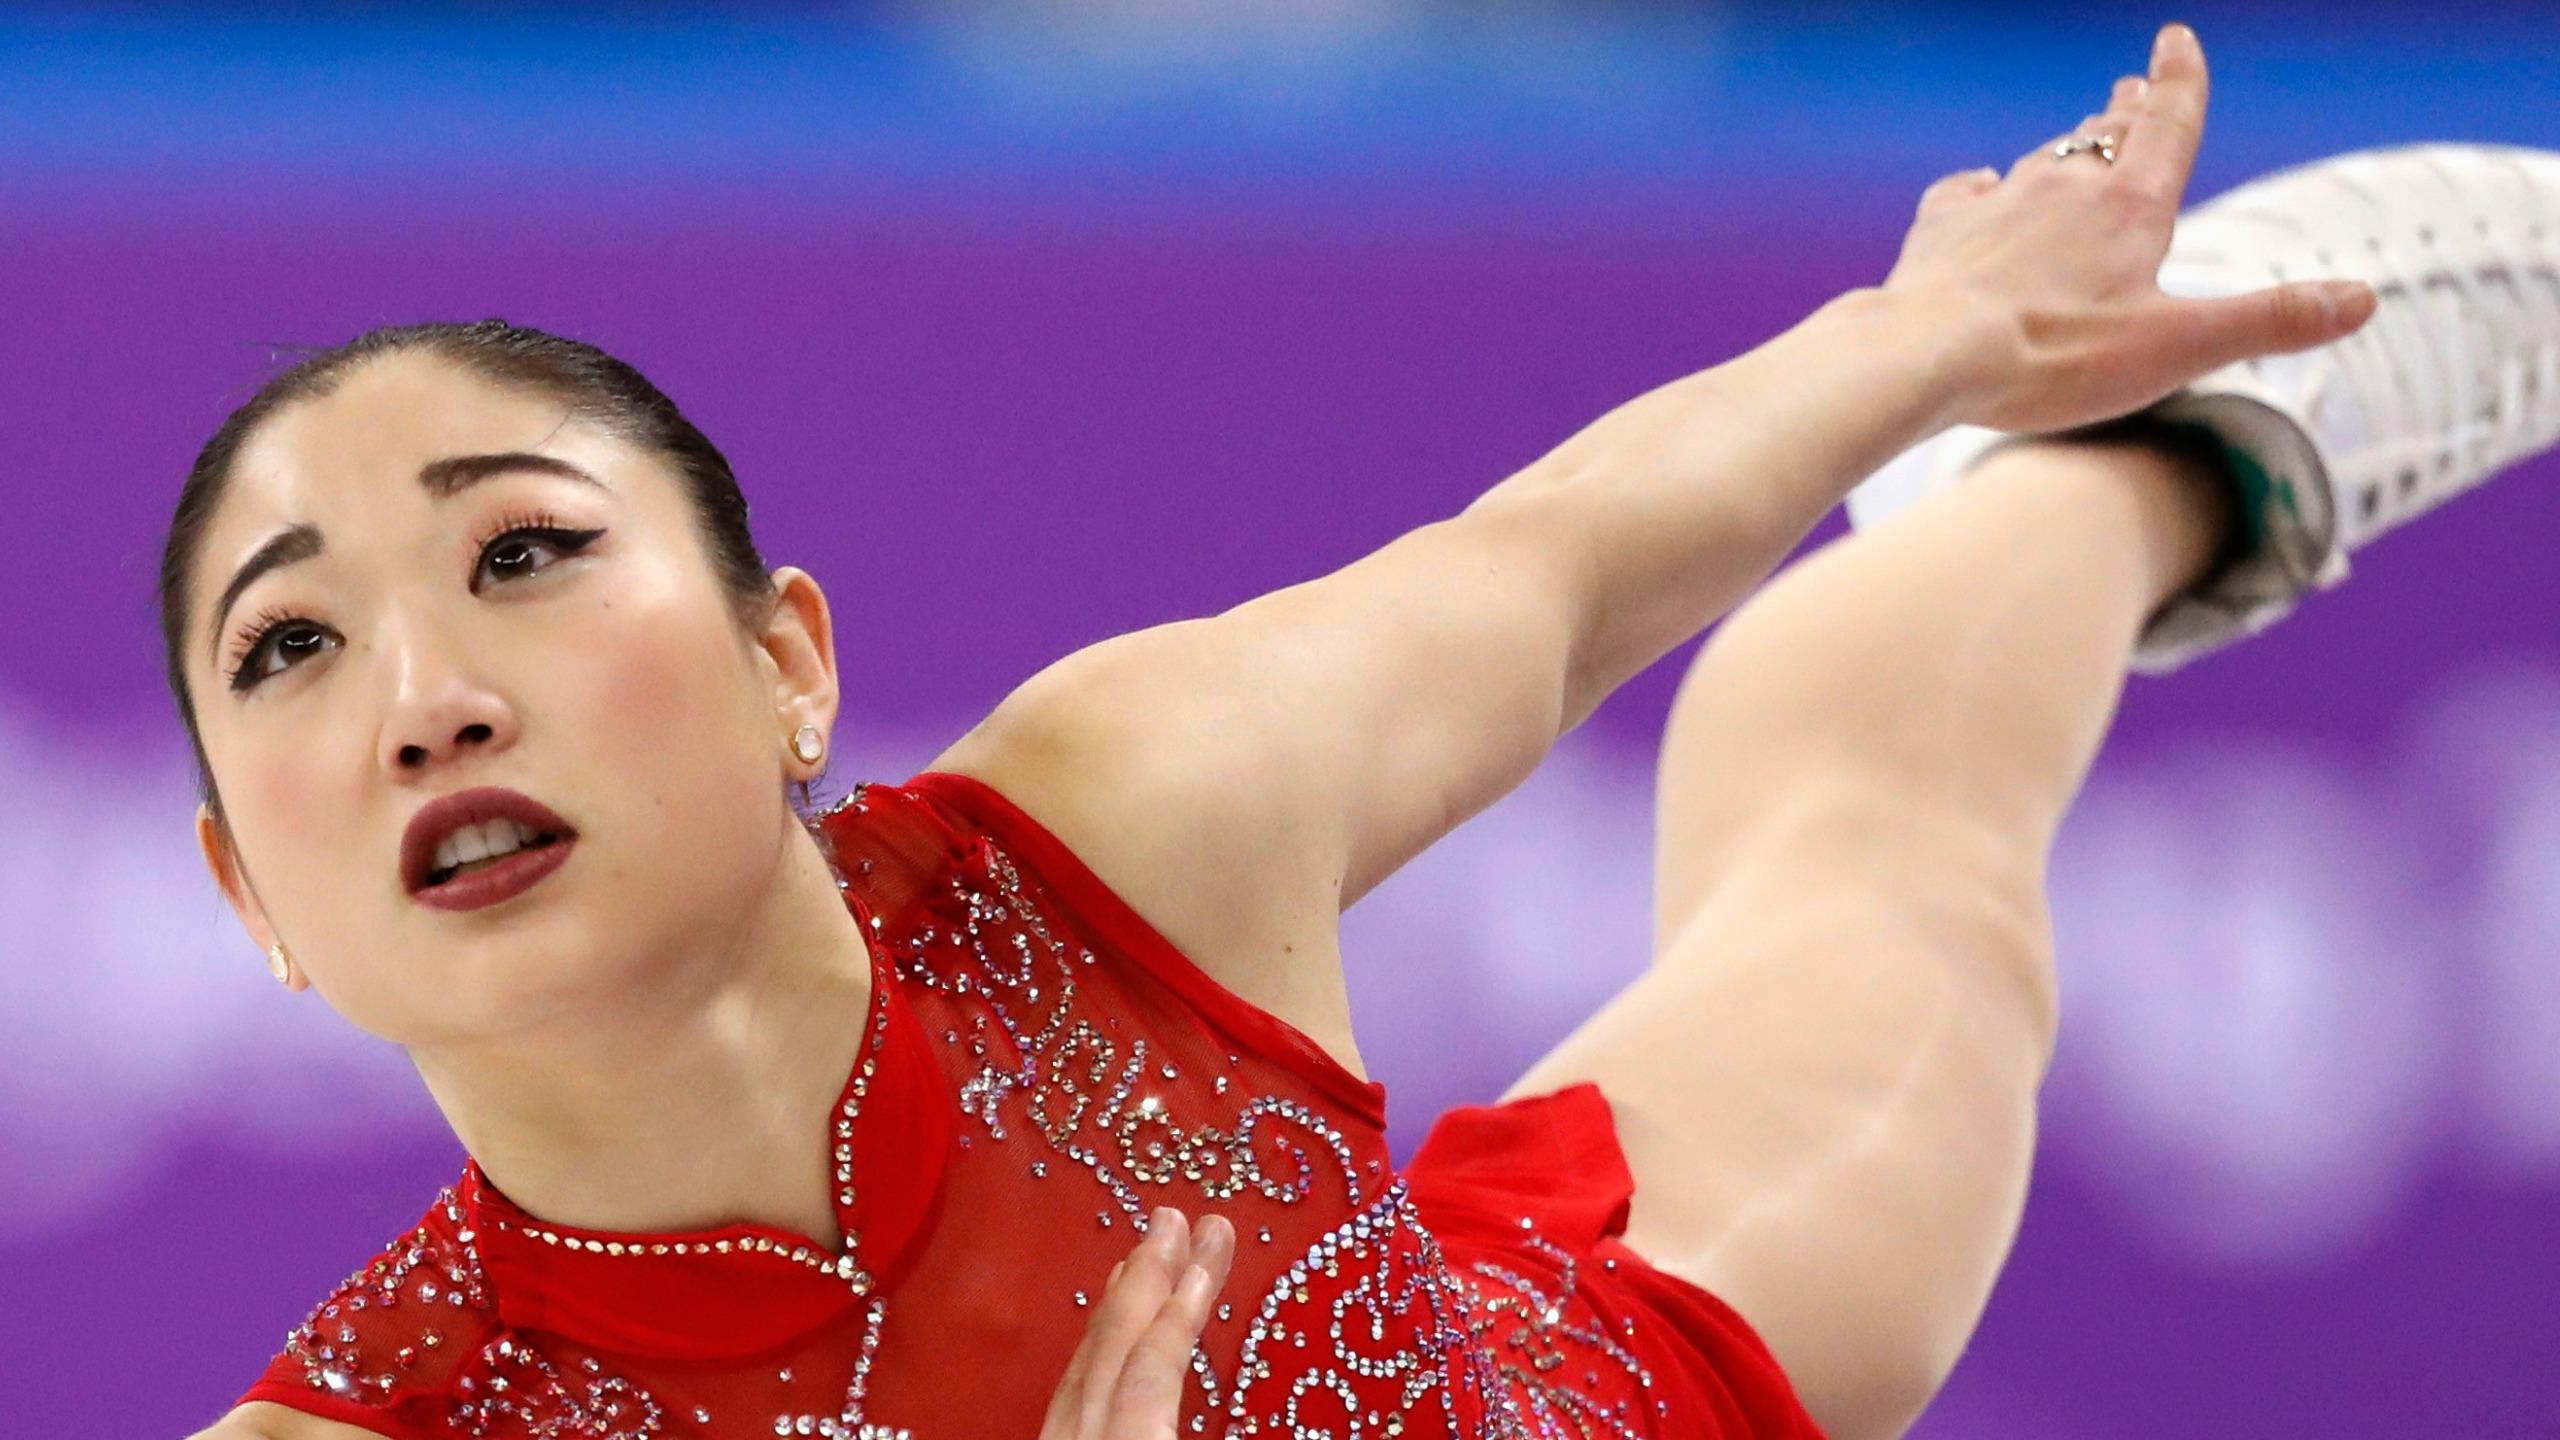 U.S. Figure Skater Lands Historic Triple Axel at the Olympics